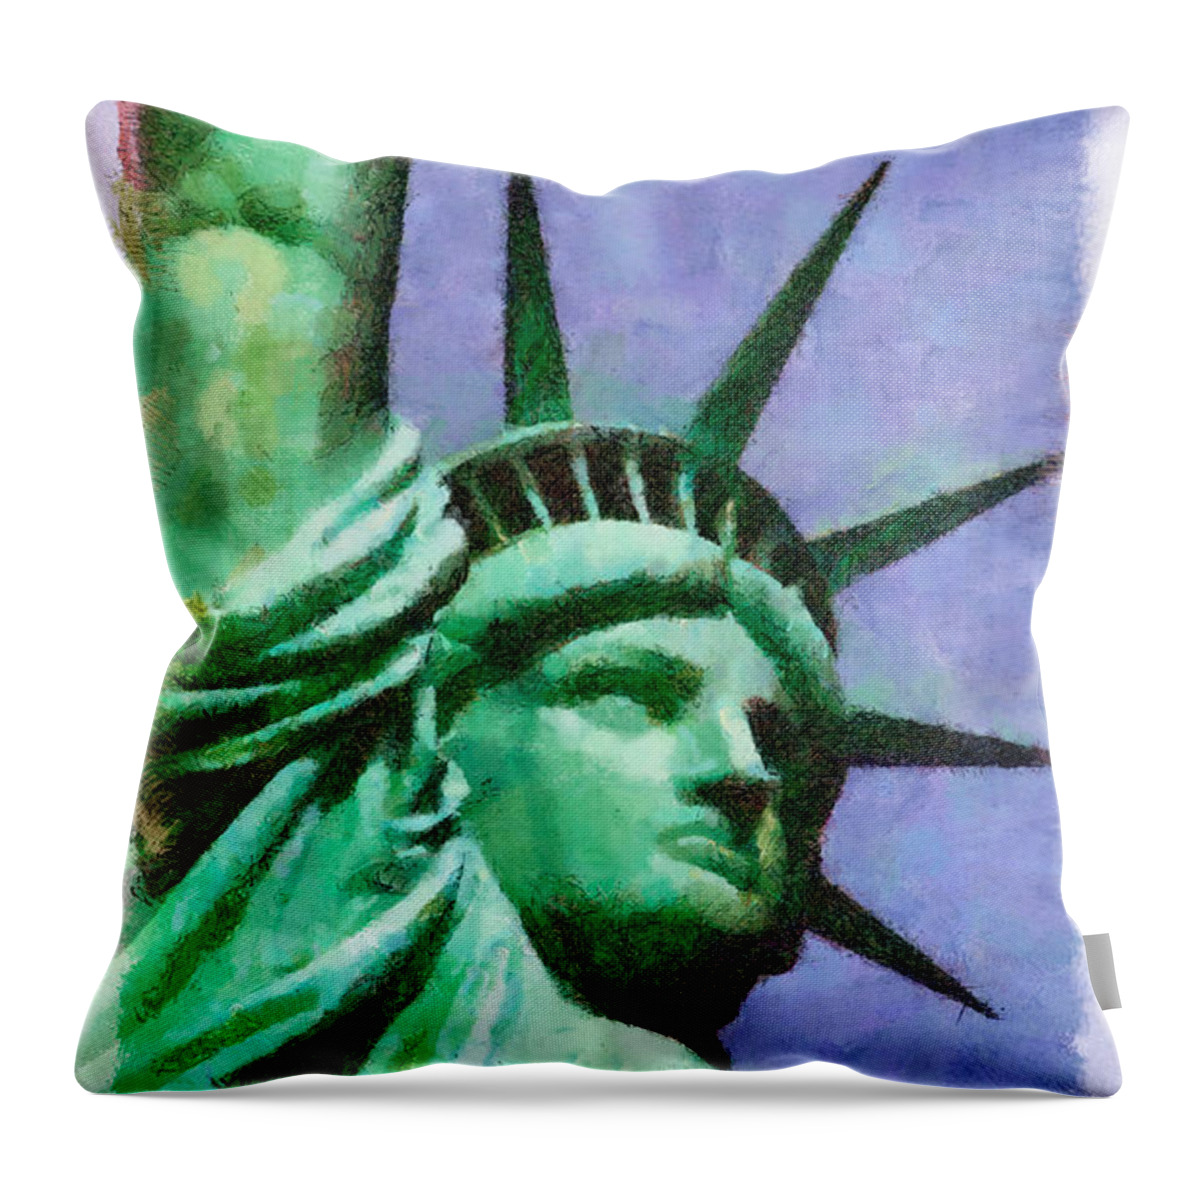 New York City Throw Pillow featuring the painting Lady Liberty by Betsy Foster Breen